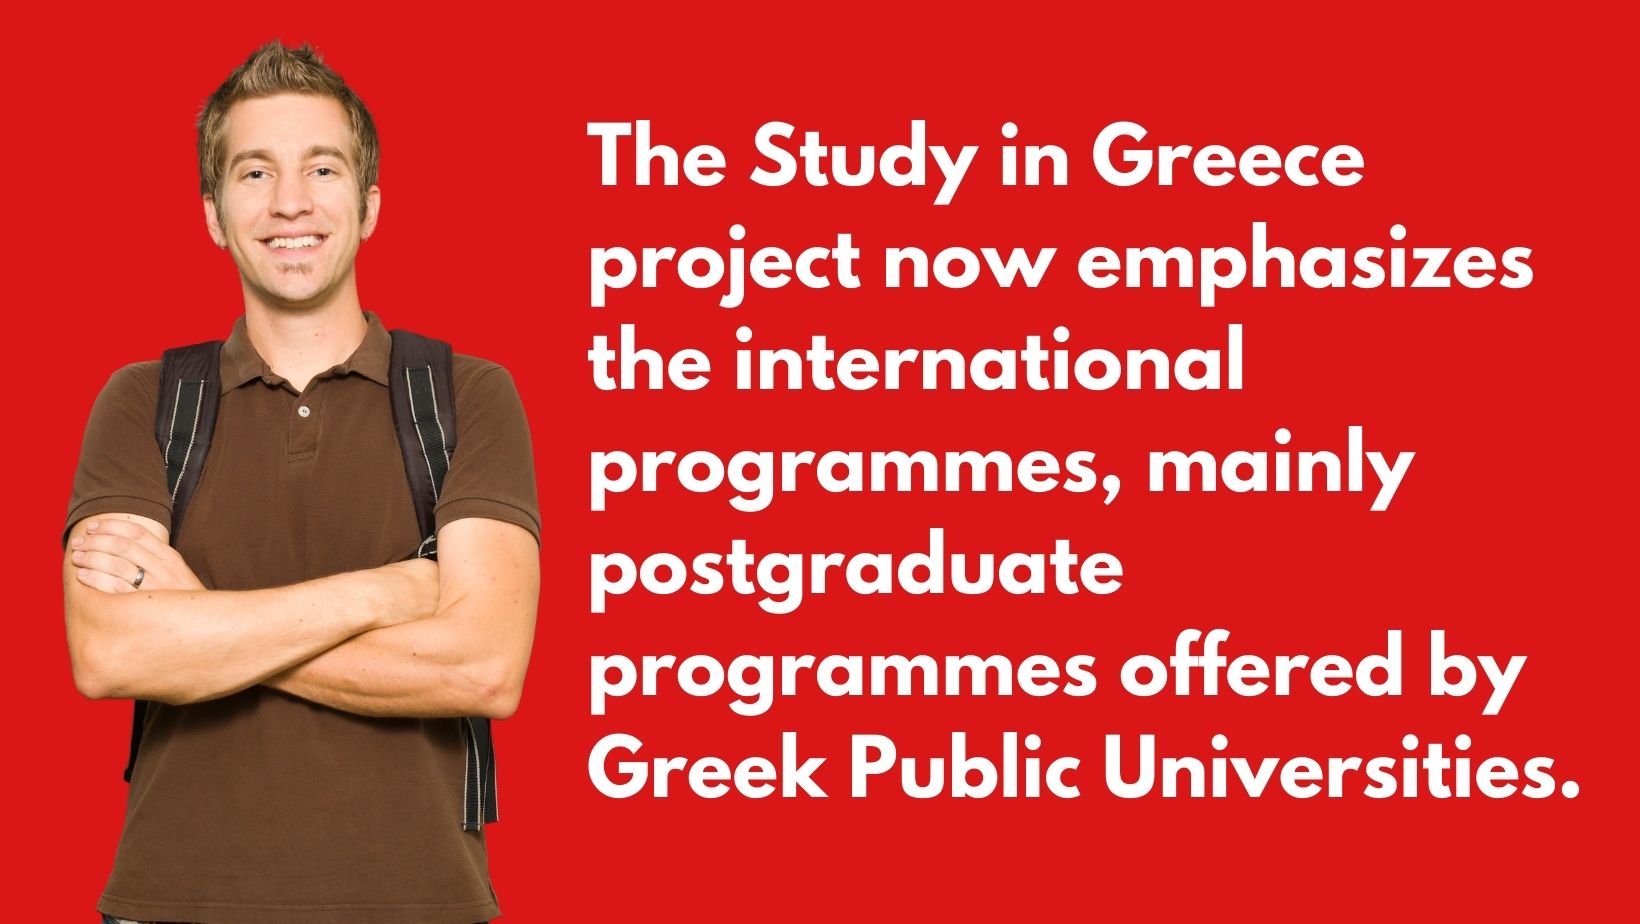 The Study in Greece project now emphasizes the international programmes, mainly postgraduate programmes offered by Greek universities.